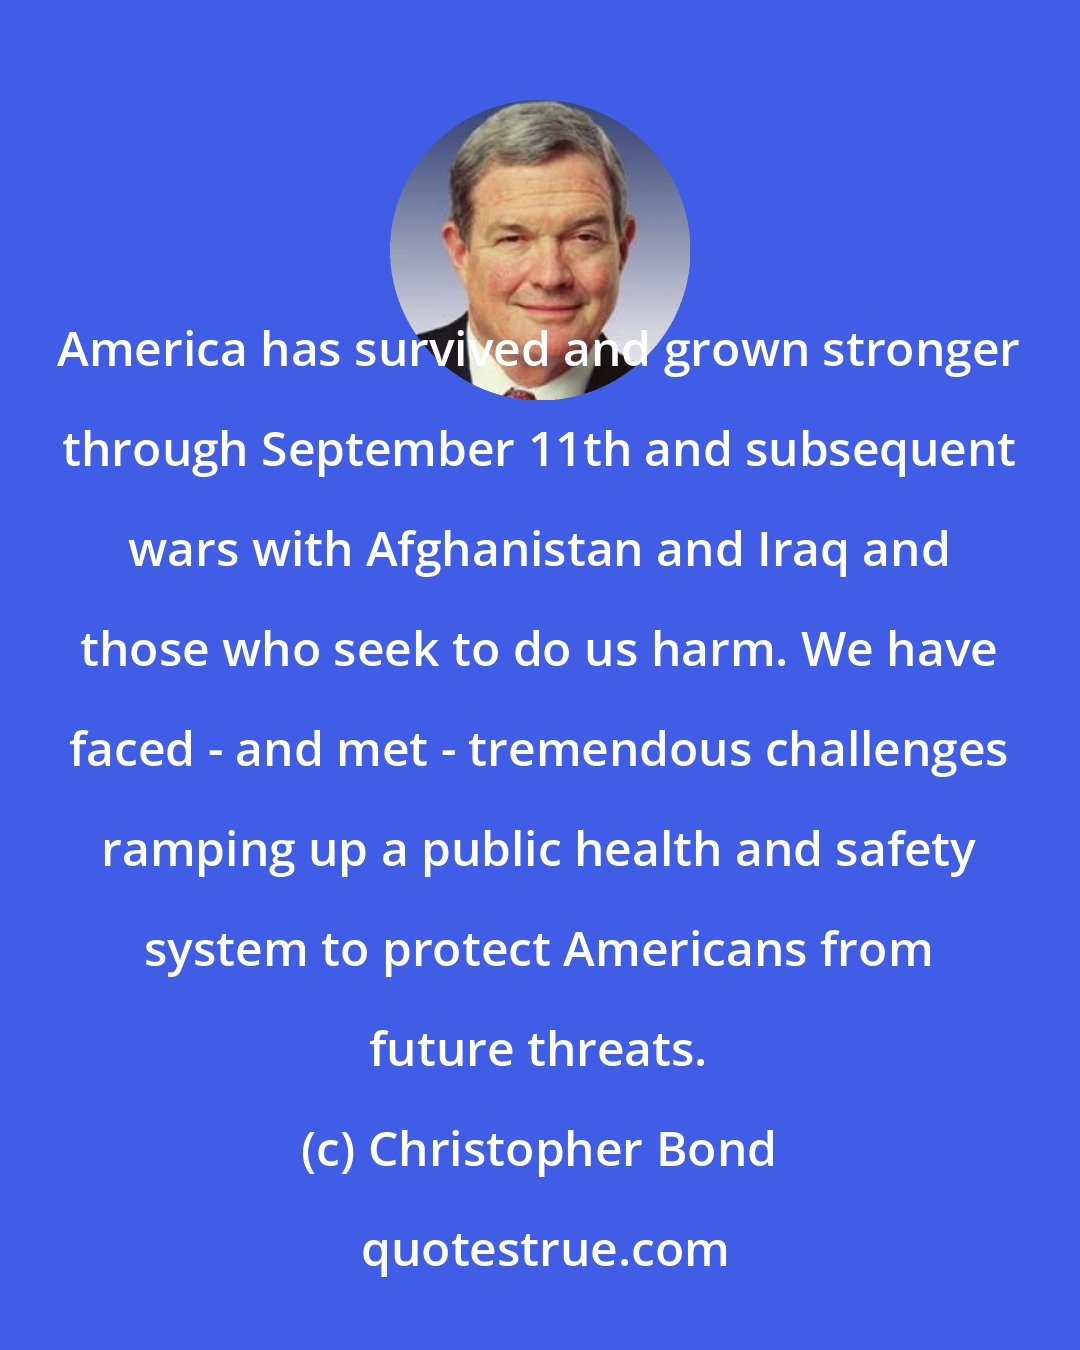 Christopher Bond: America has survived and grown stronger through September 11th and subsequent wars with Afghanistan and Iraq and those who seek to do us harm. We have faced - and met - tremendous challenges ramping up a public health and safety system to protect Americans from future threats.